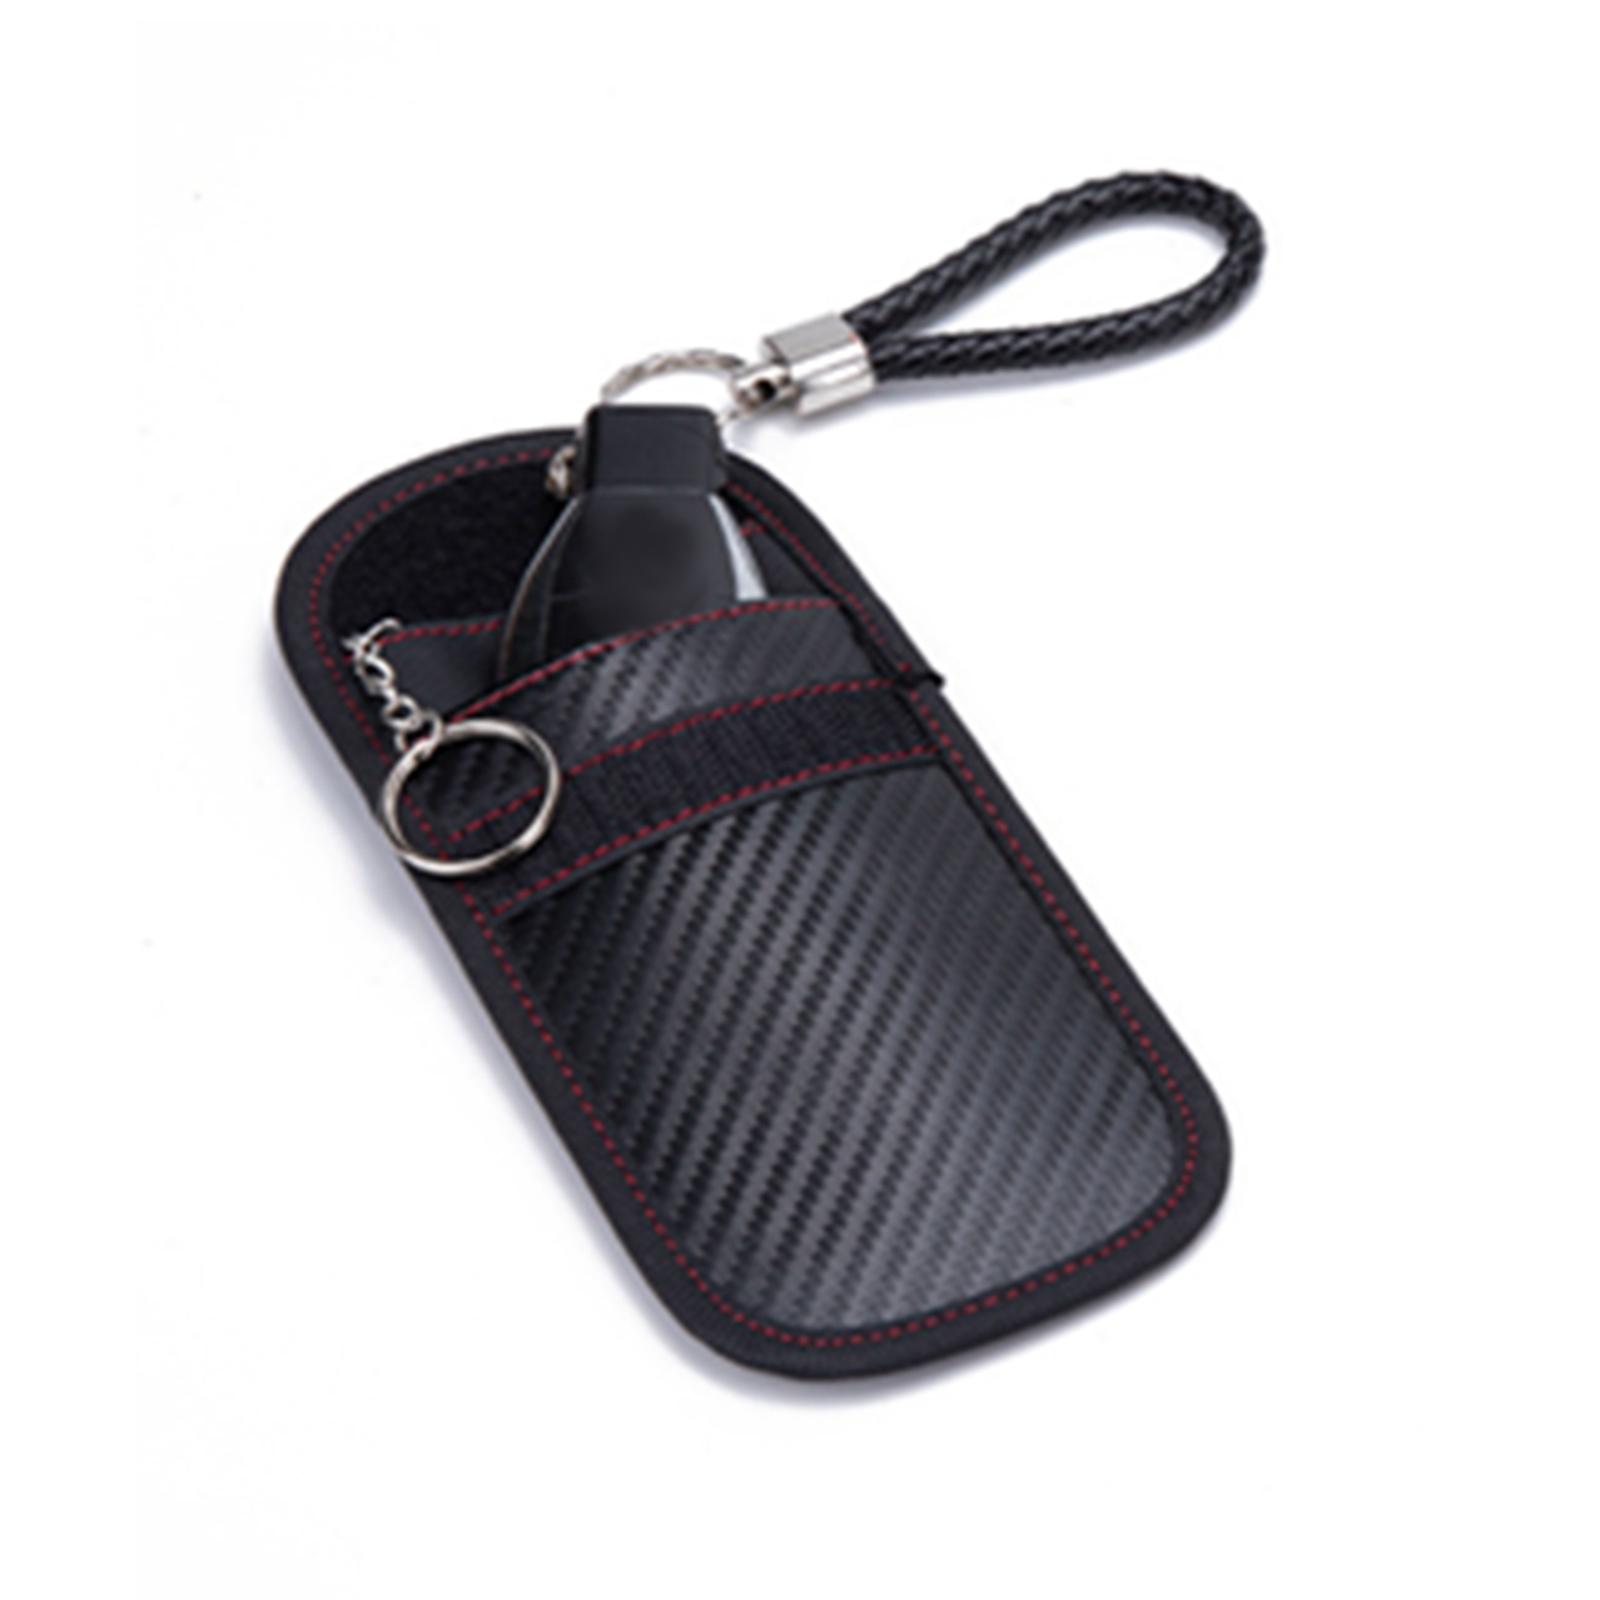 Car Key Signal Blocker Pouch Organizer for Credit Card Office Traveling